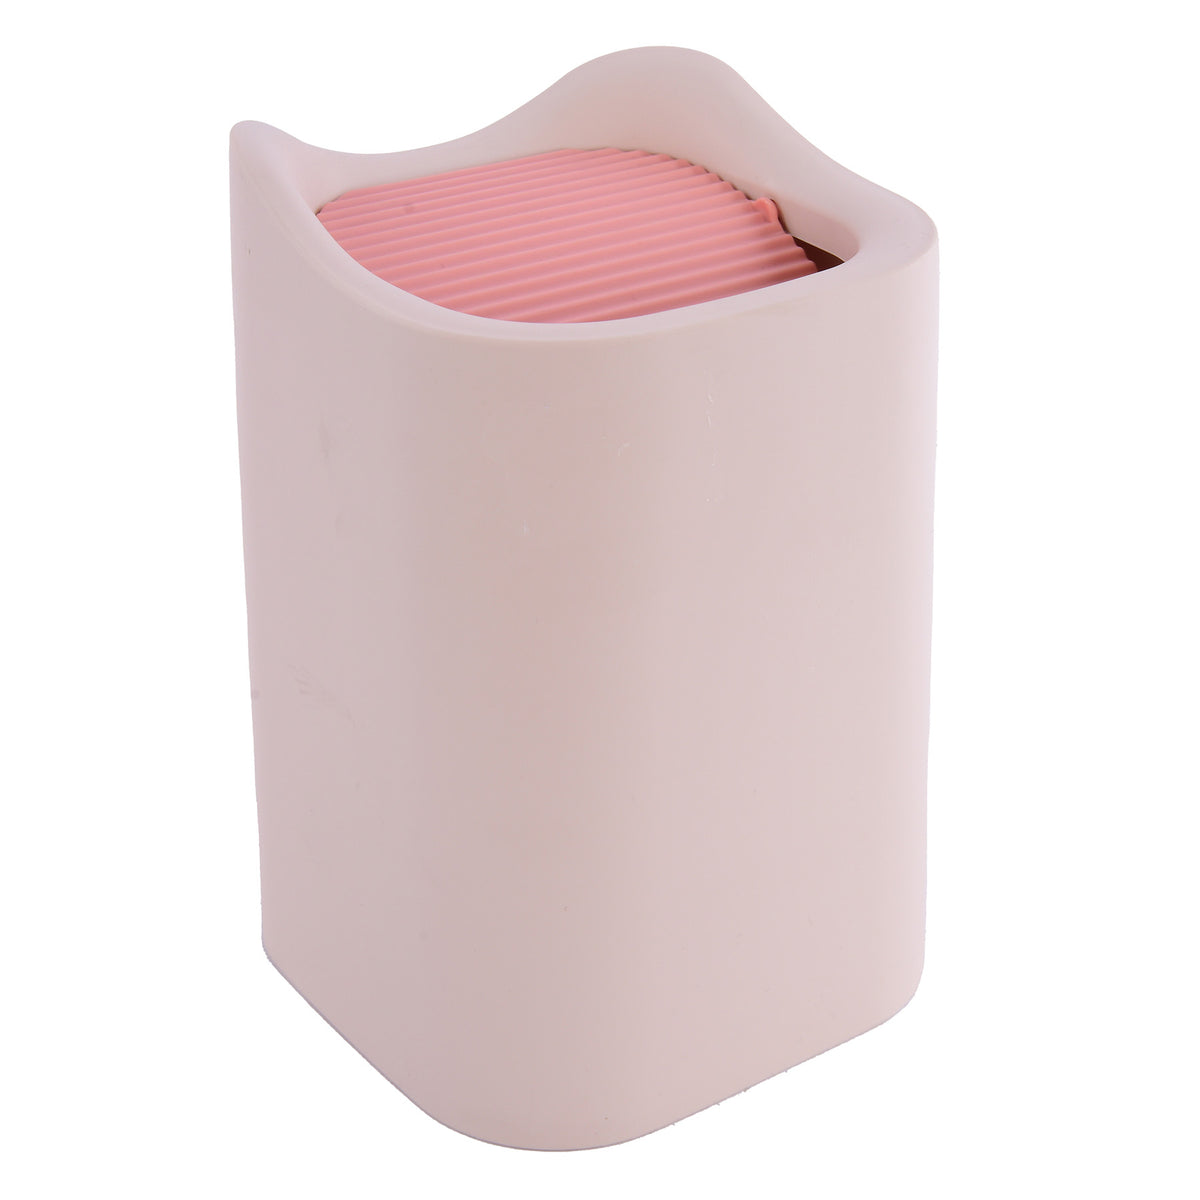 Table trash can - pink